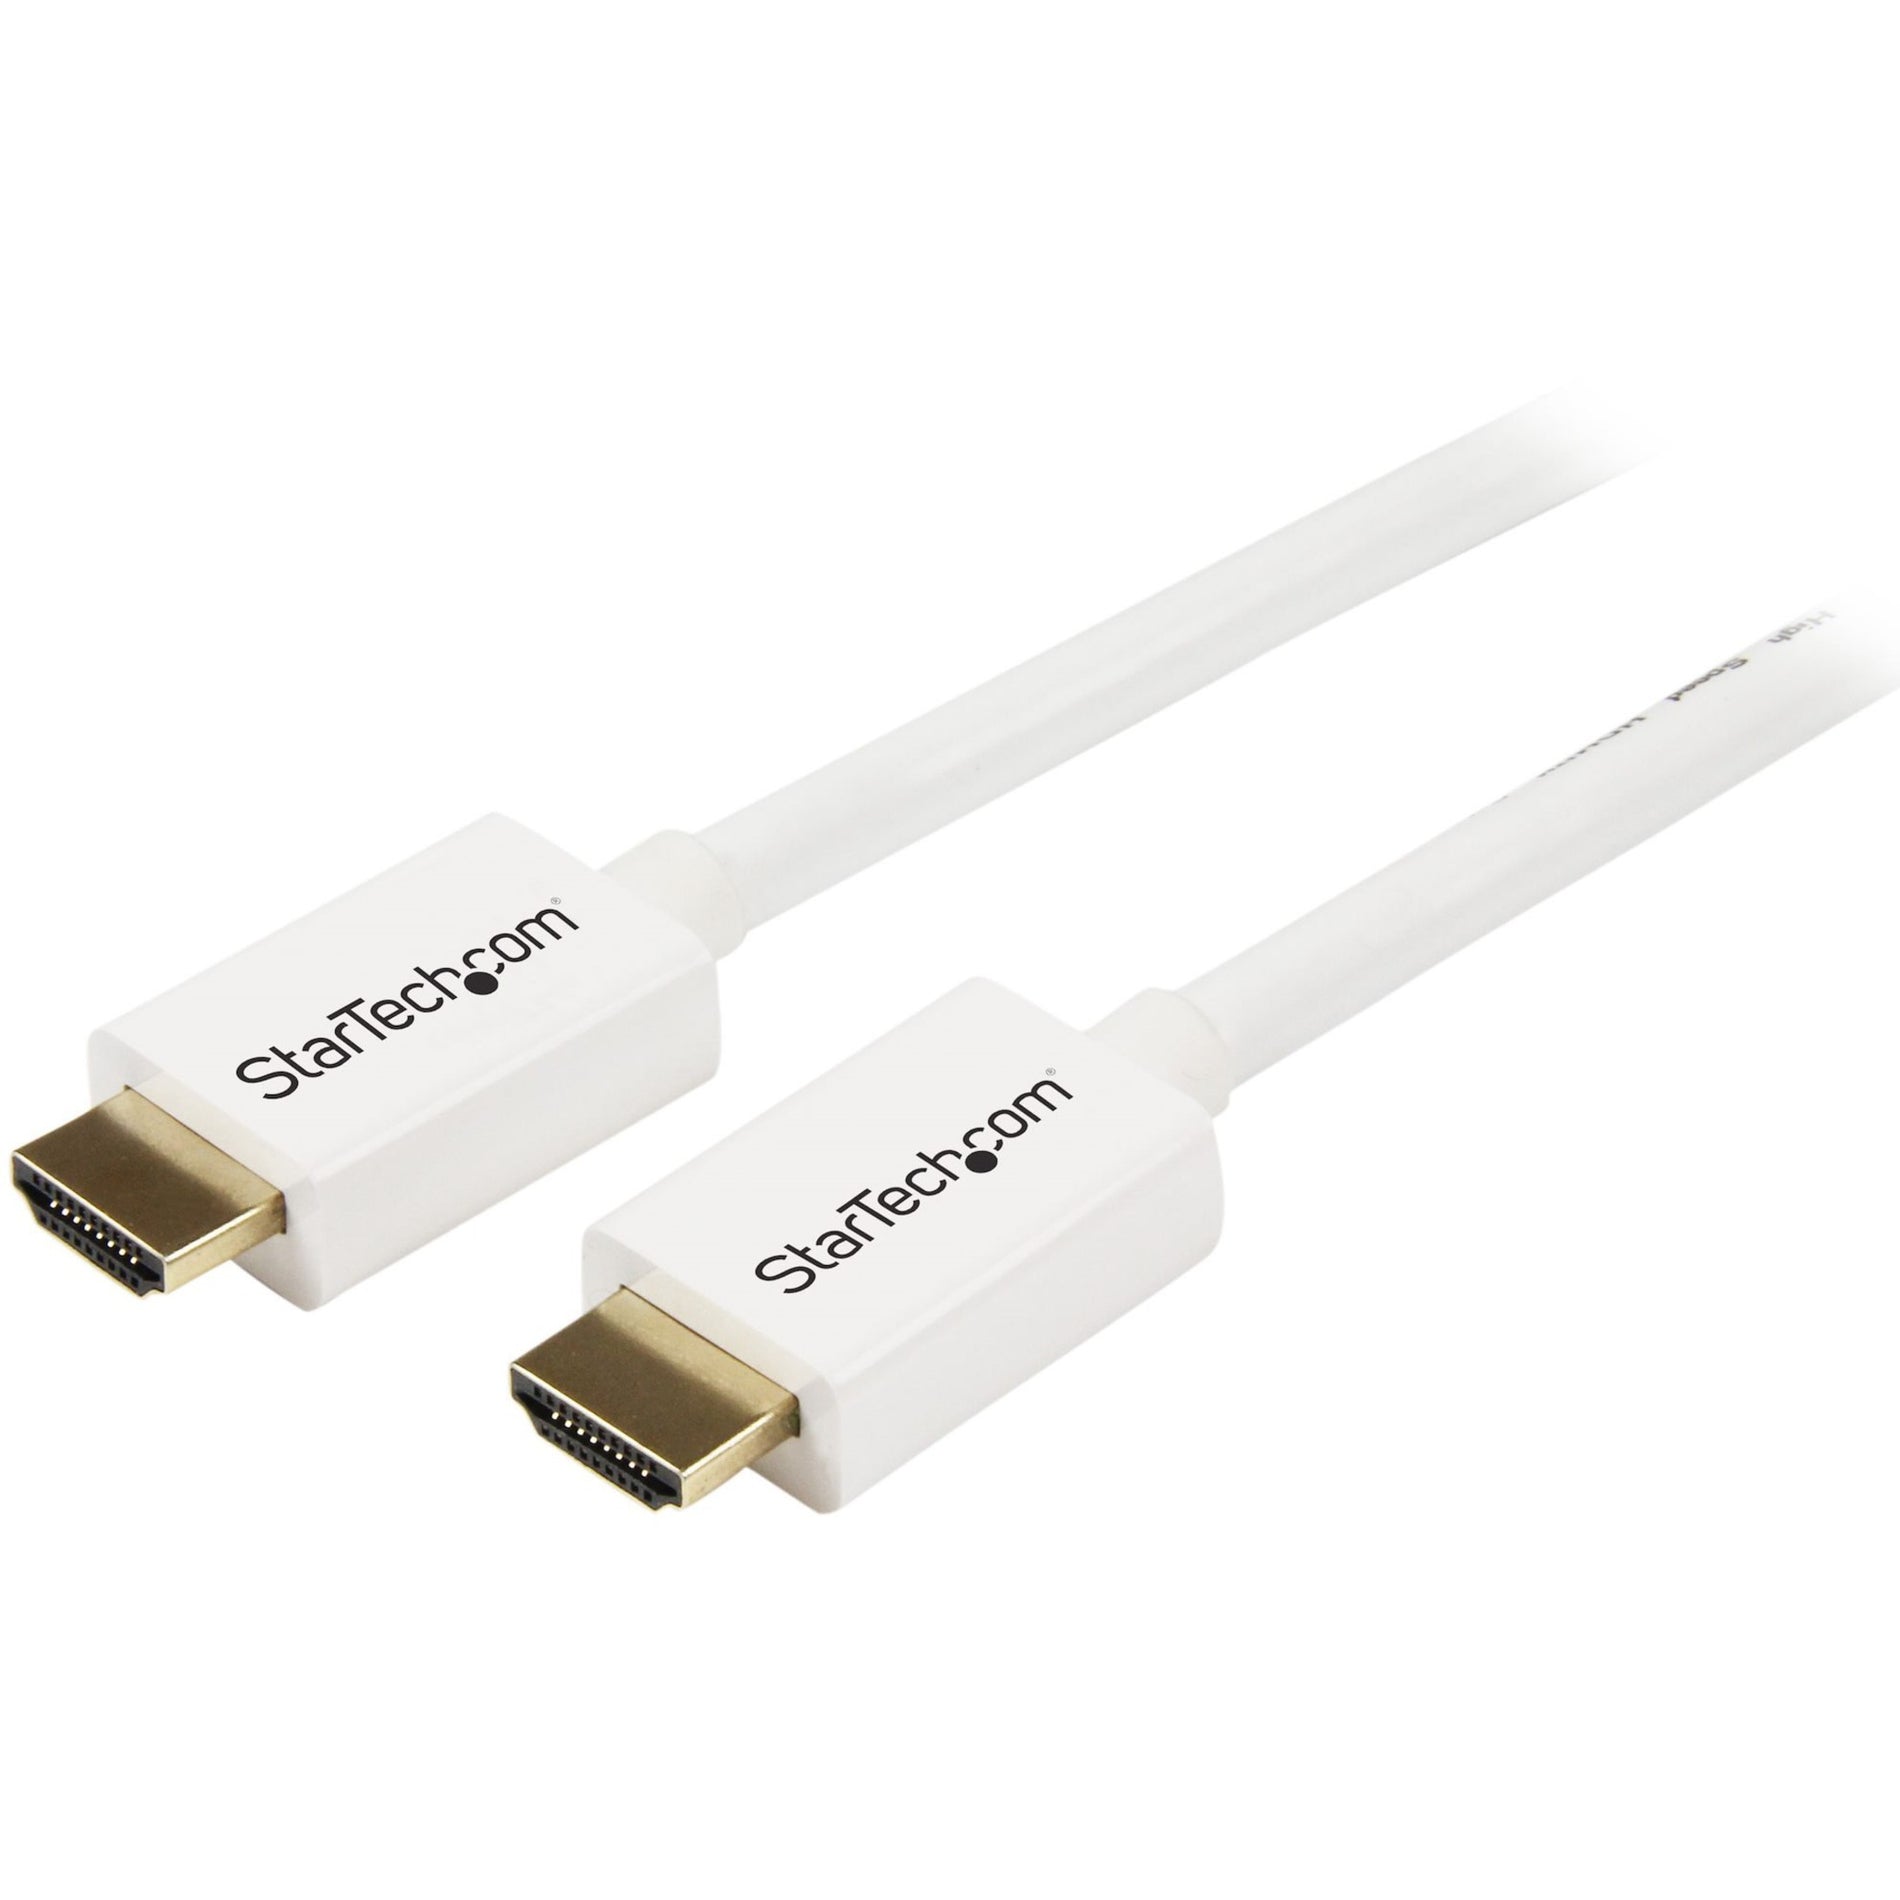 StarTech.com HD3MM3MW White CL3 In-wall High Speed HDMI Cable - HDMI to HDMI - M/M, 9.84 ft, Corrosion-free, Gold Plated Connectors, 10.2 Gbit/s Data Transfer Rate